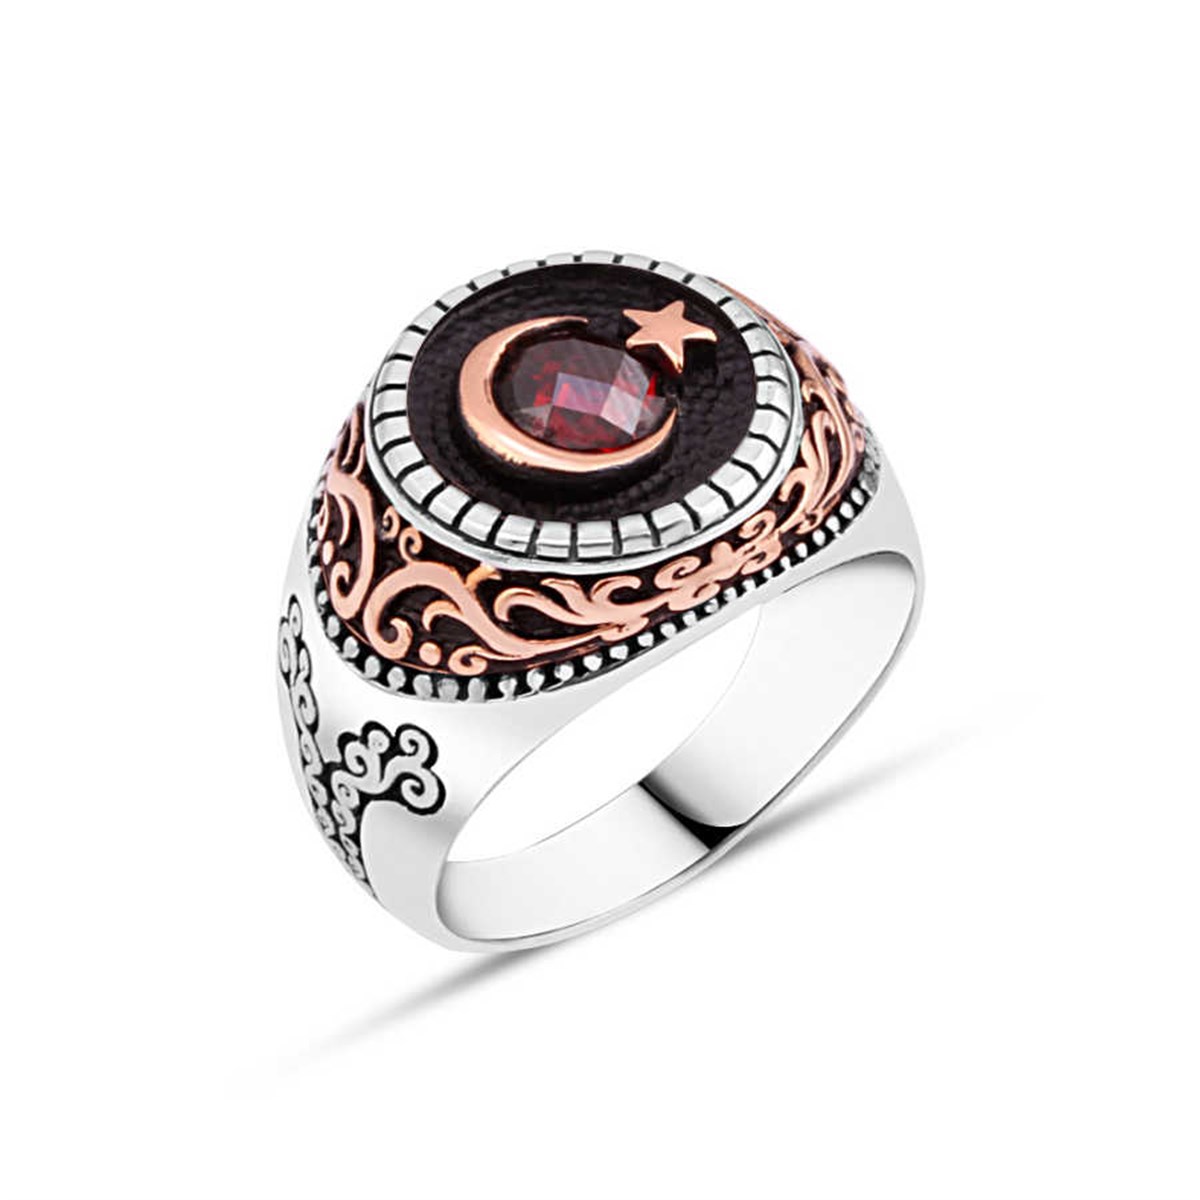 Sterling Silver Men's Ring with Onix Stone and Zircon Stone